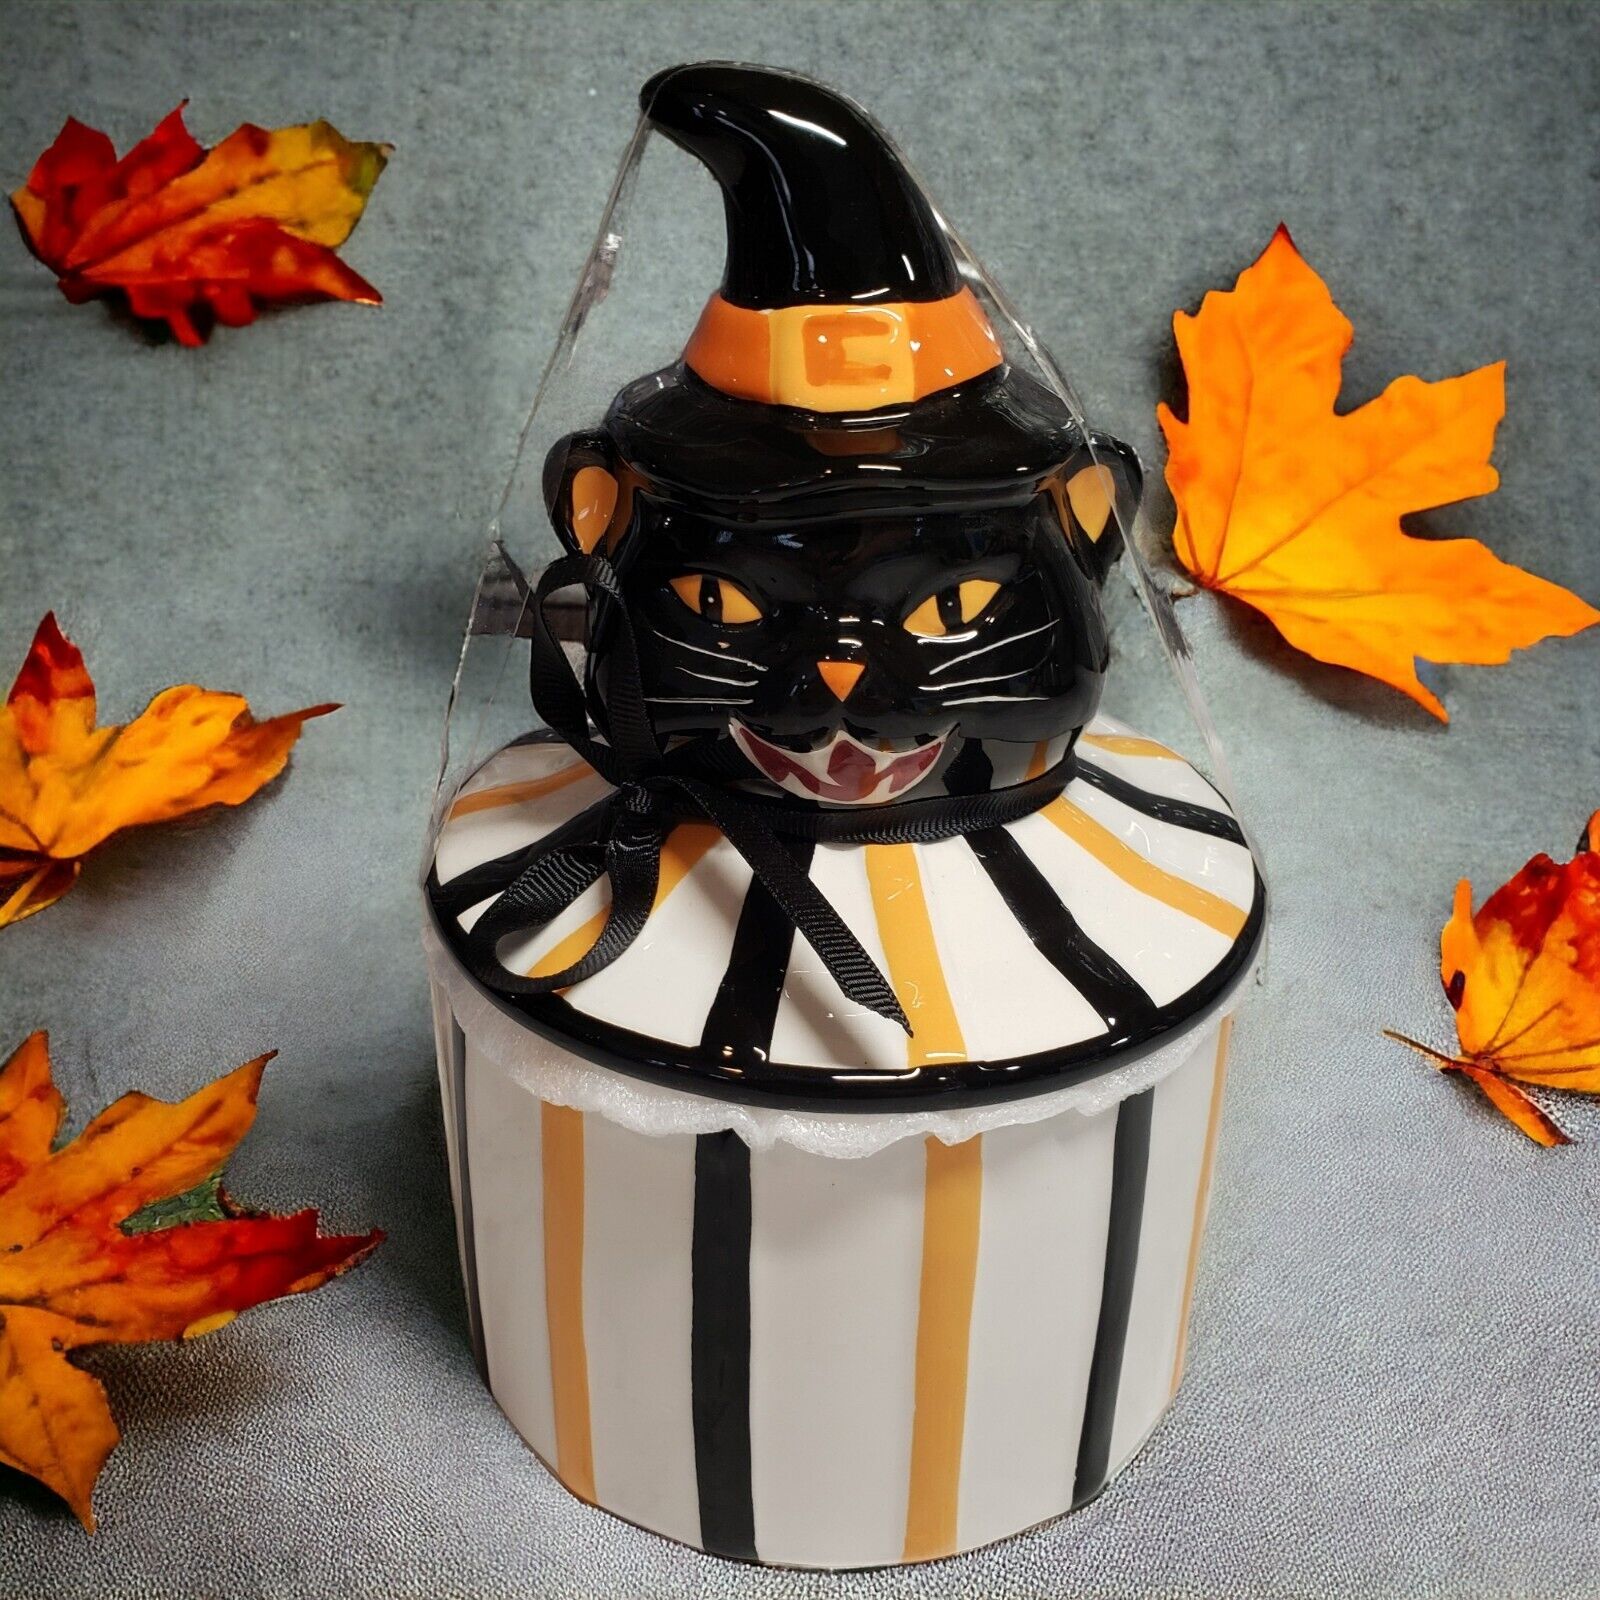 Potter’s Studio Halloween Sweet Street BLACK CAT Canister Cookie Candy Jar NEW